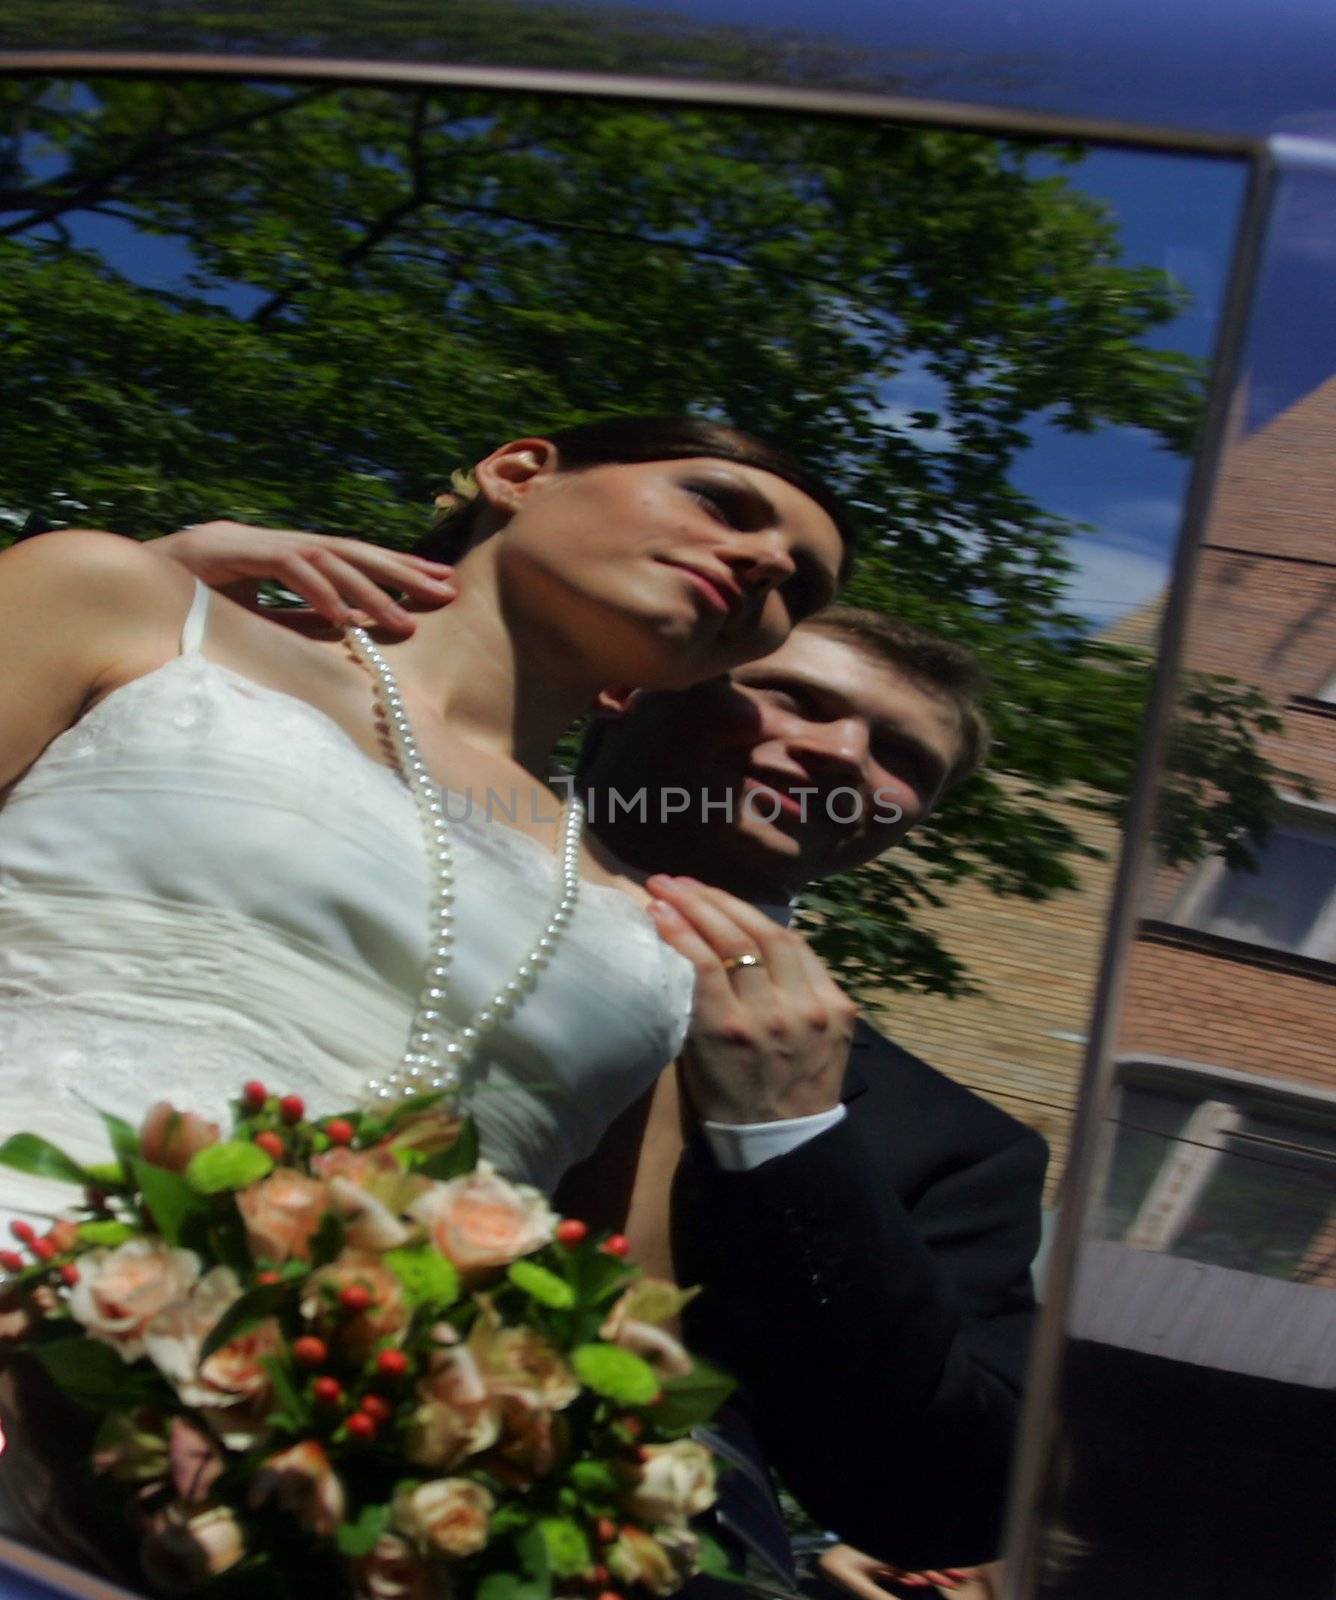 Reflection of newlywed couple in window of motor car.